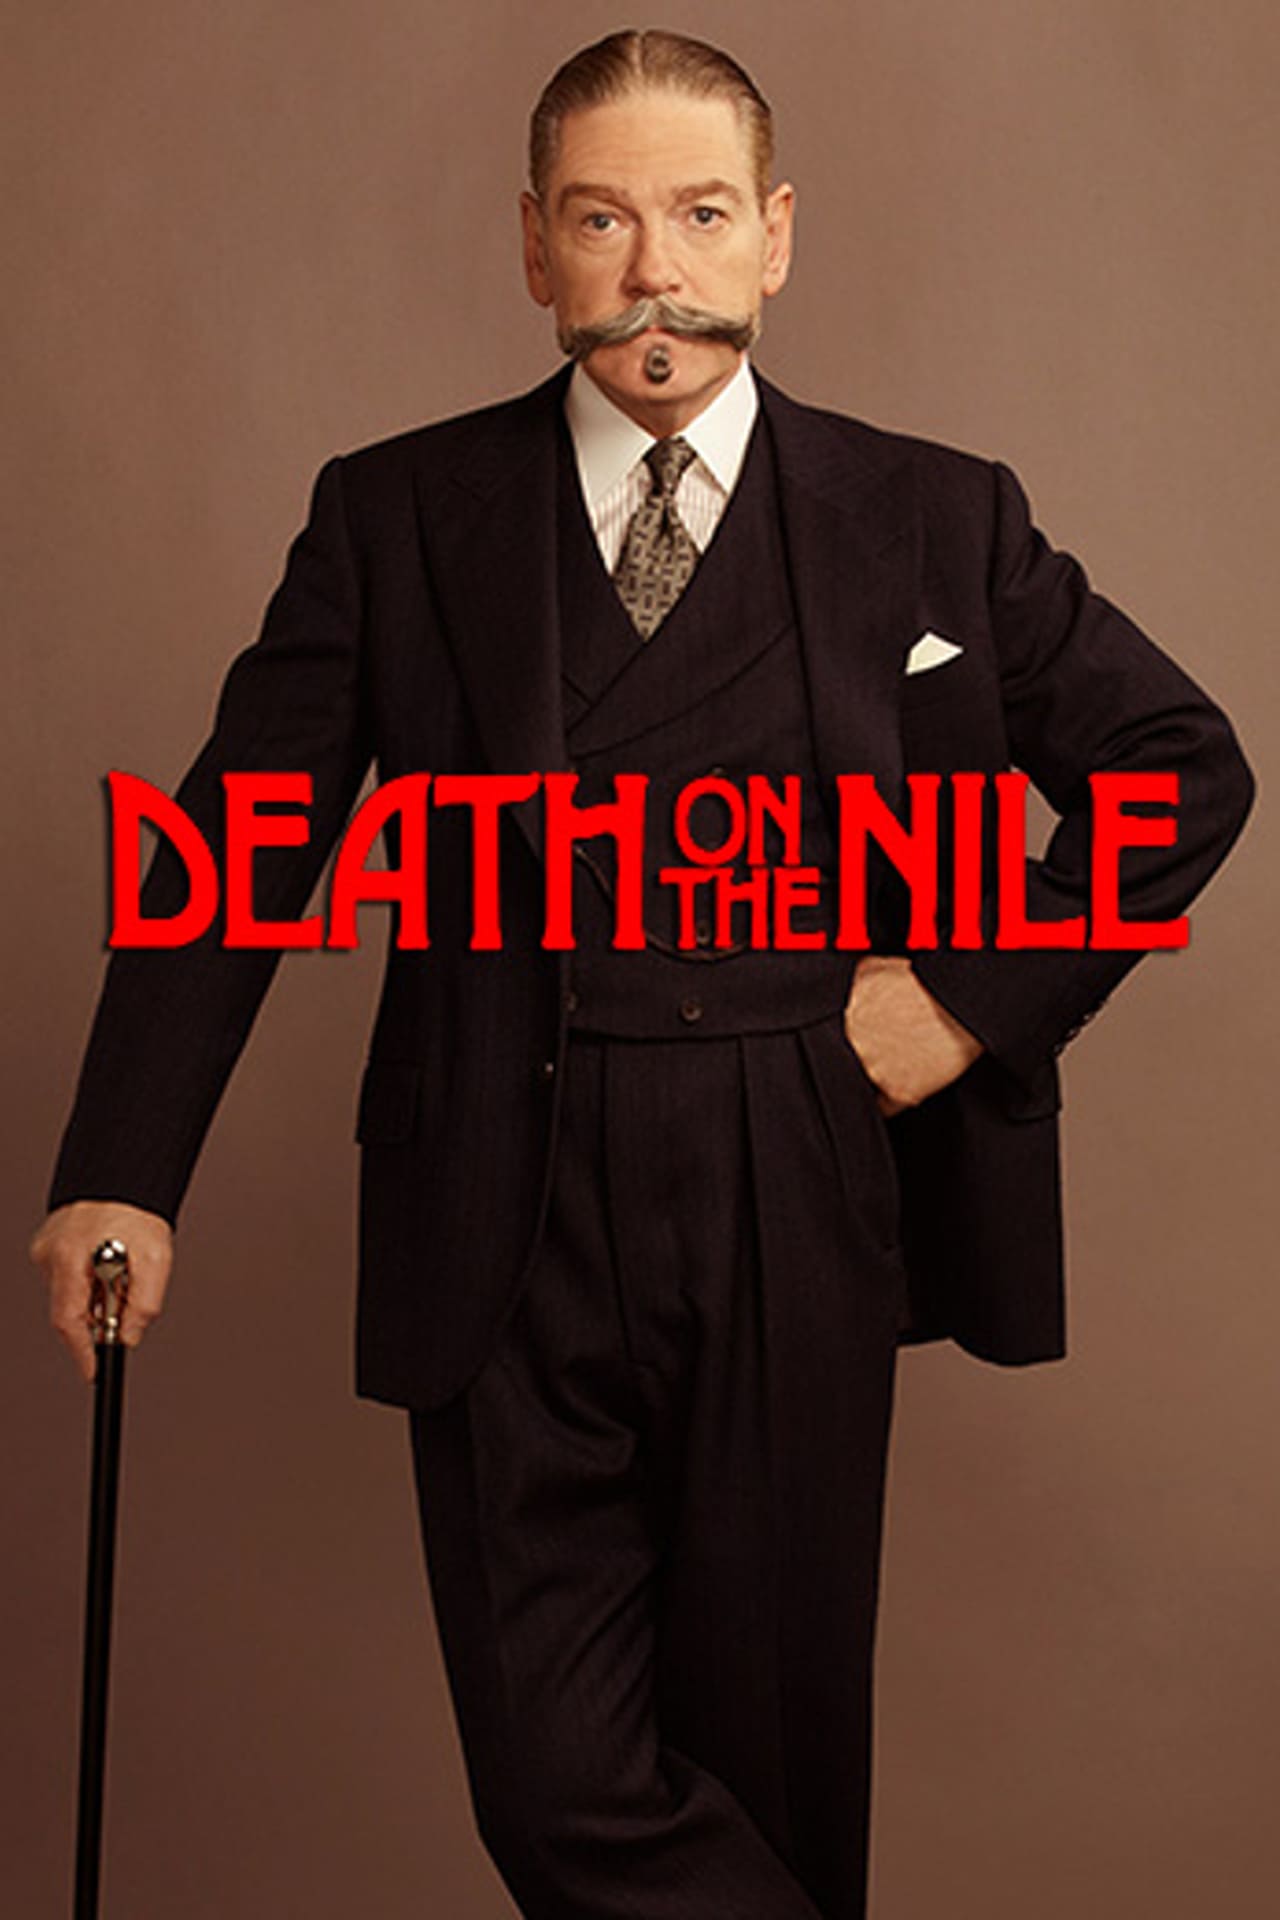 Death on the Nile - Download movies 2021 - Free new movies